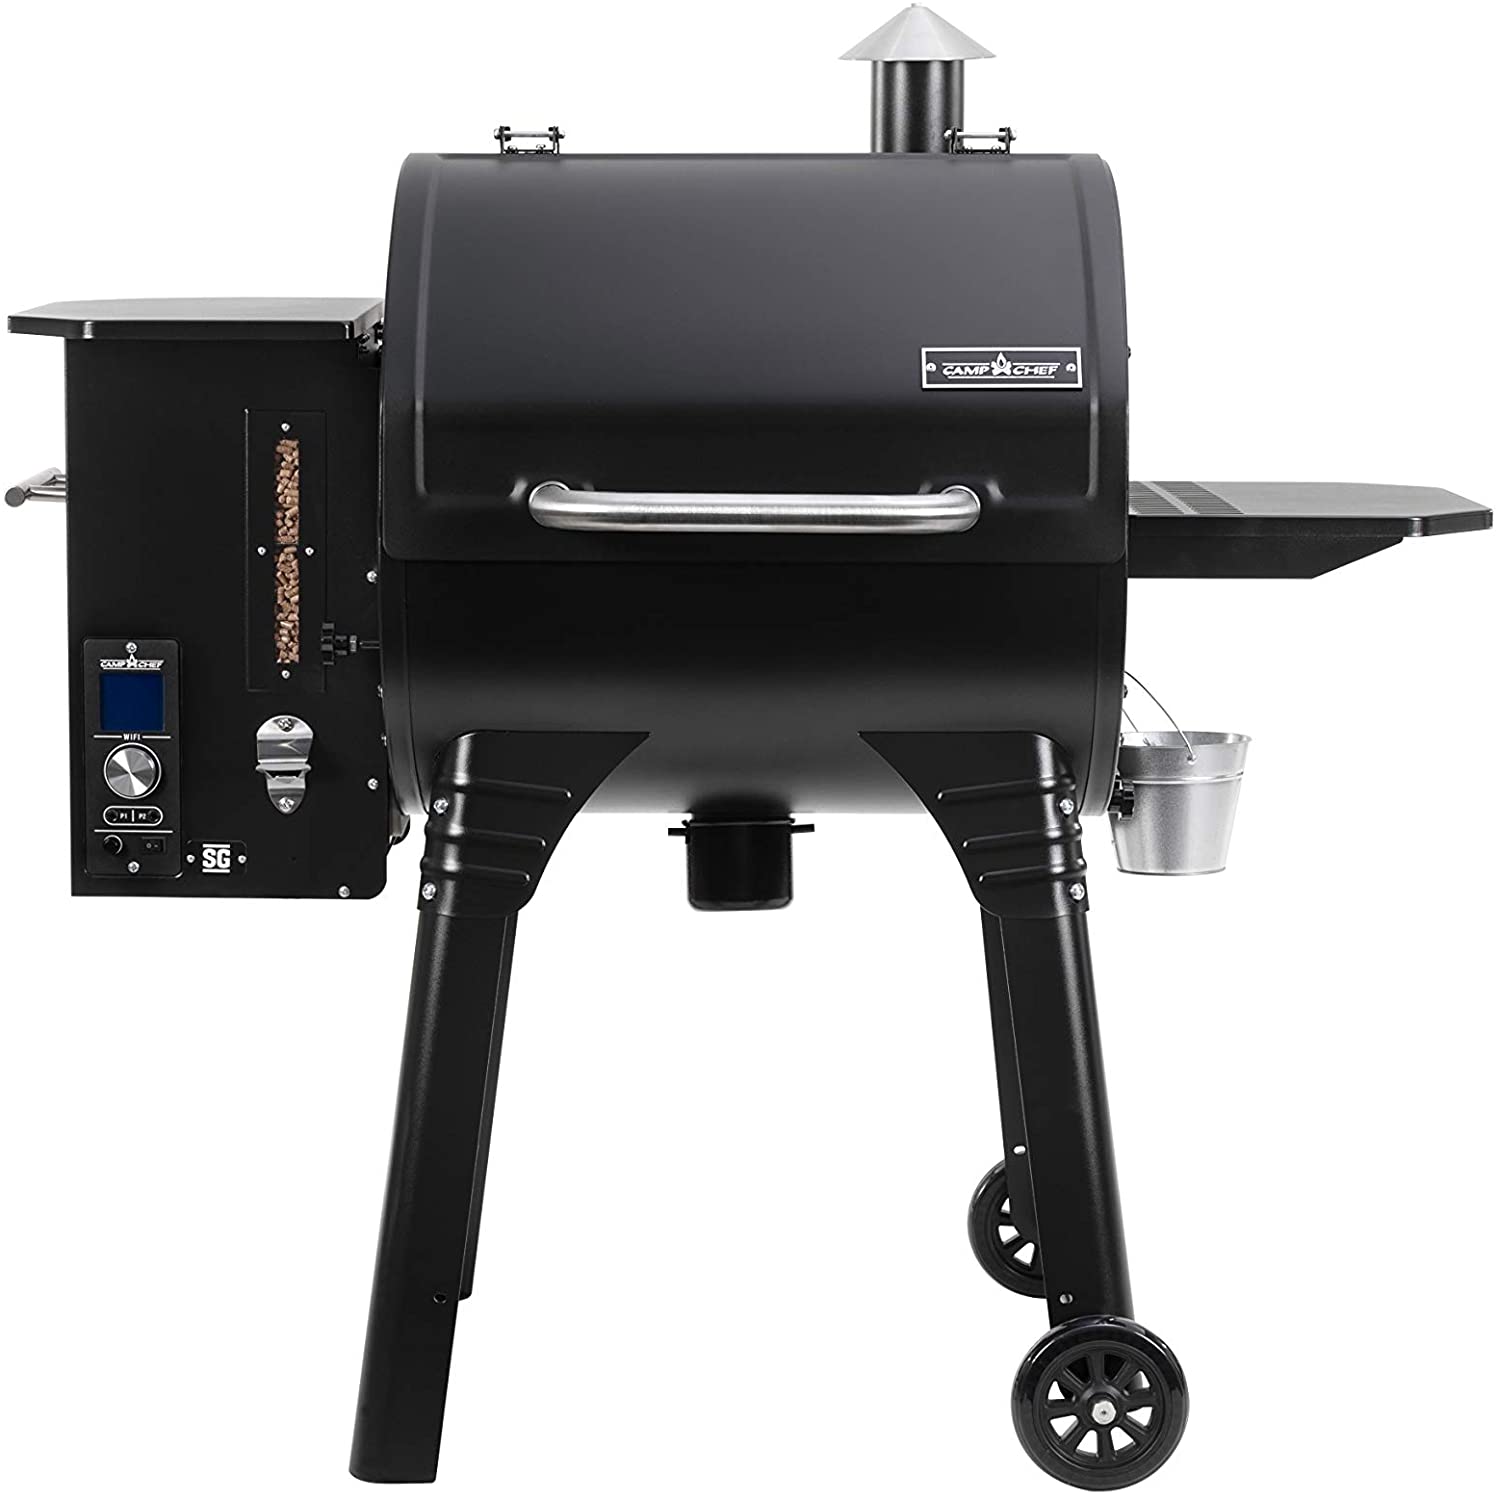  Camp Chef SmokePro SG (Best Pellet Grill Under 700):